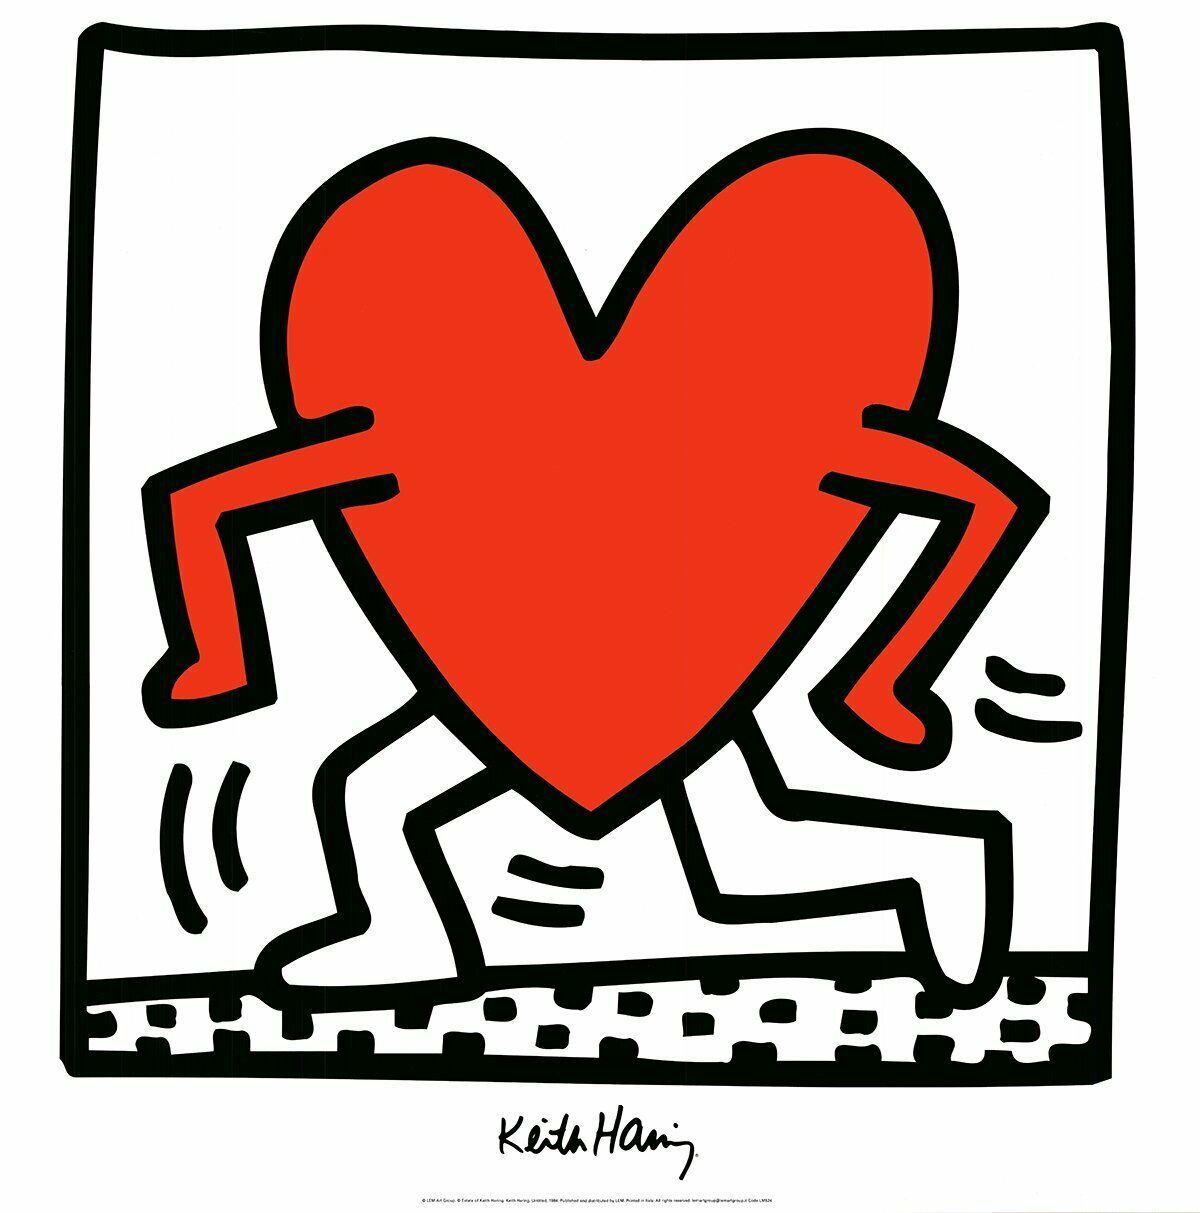 KEITH HARING Untitled (1984) 27.5 x 27.5 Poster 1988 Pop Art Black & White